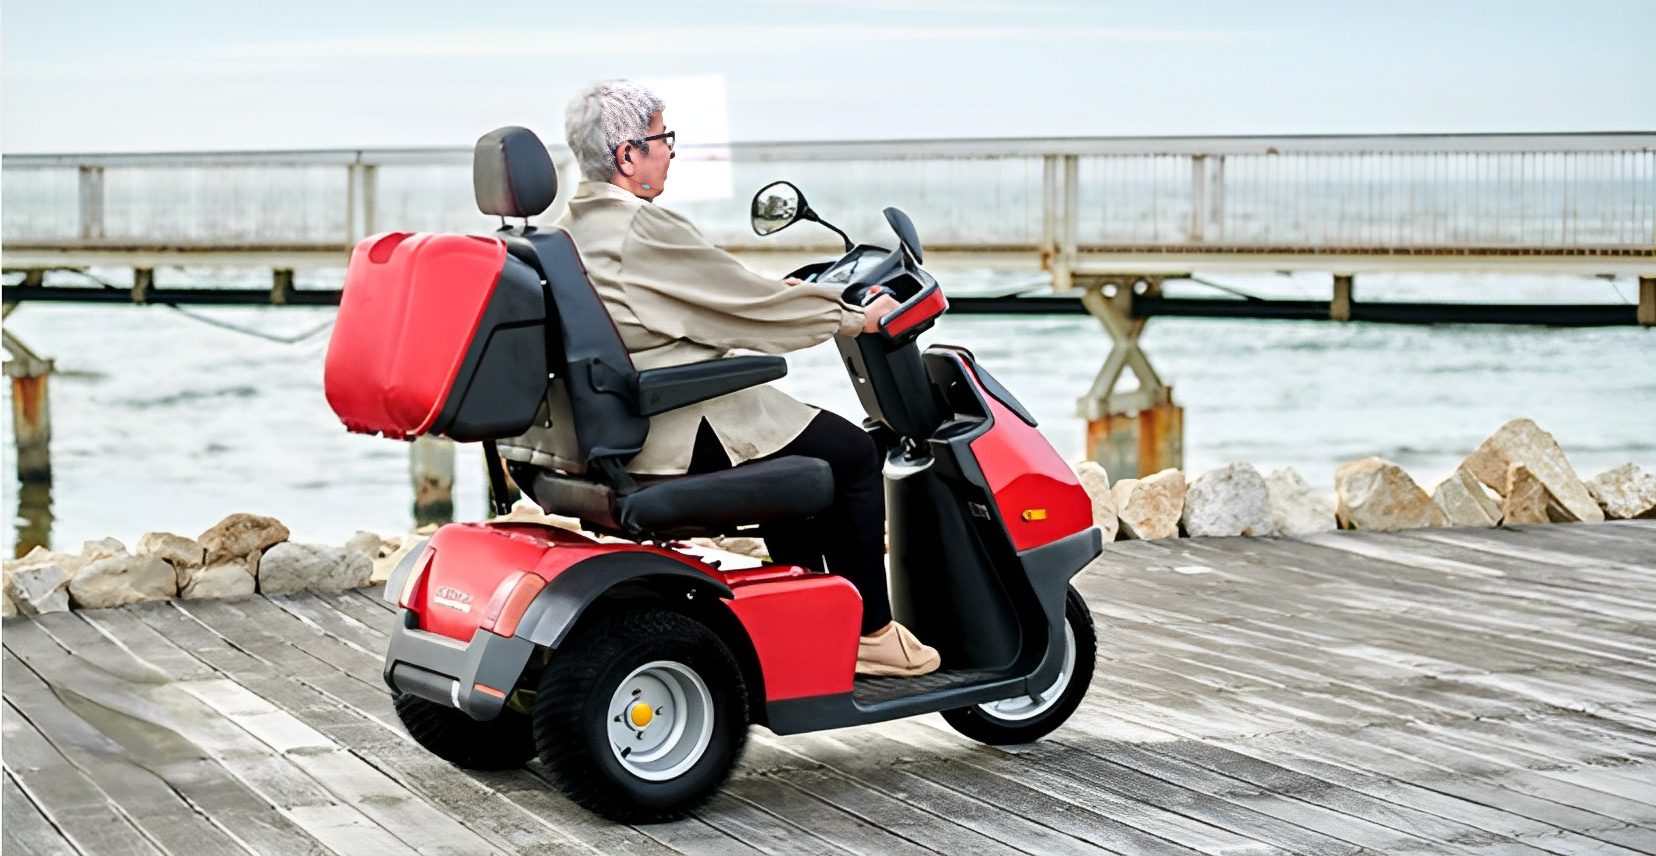 Afiscooter S3 mobility scooter in use for leisurely strolling